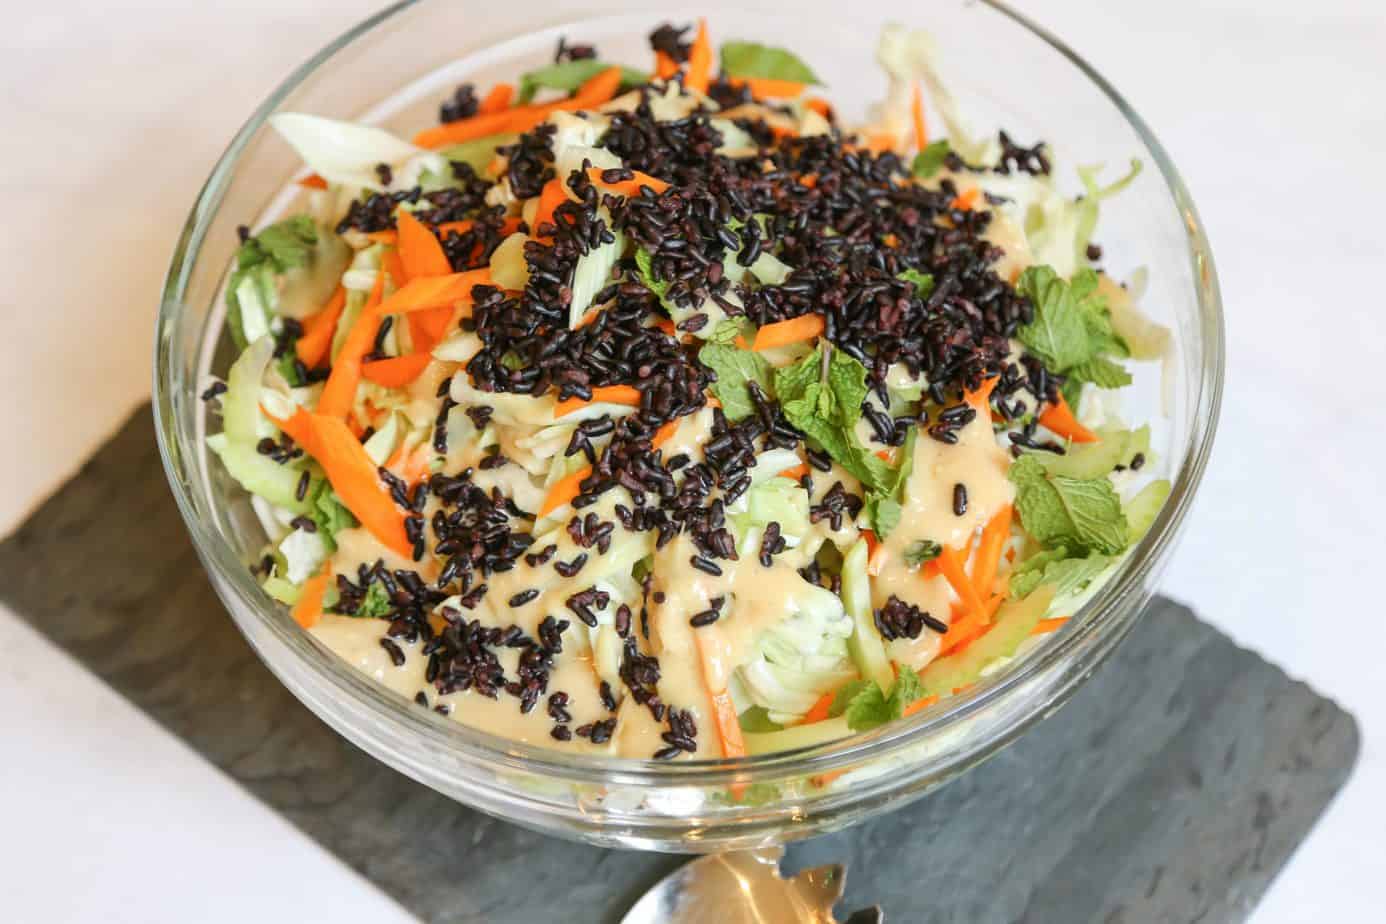 accompaniment salad with cabbage carrots ginger miso dressing and forbidden black rice and sesame seeds in a glass serving bowl with a serving spoon and fork